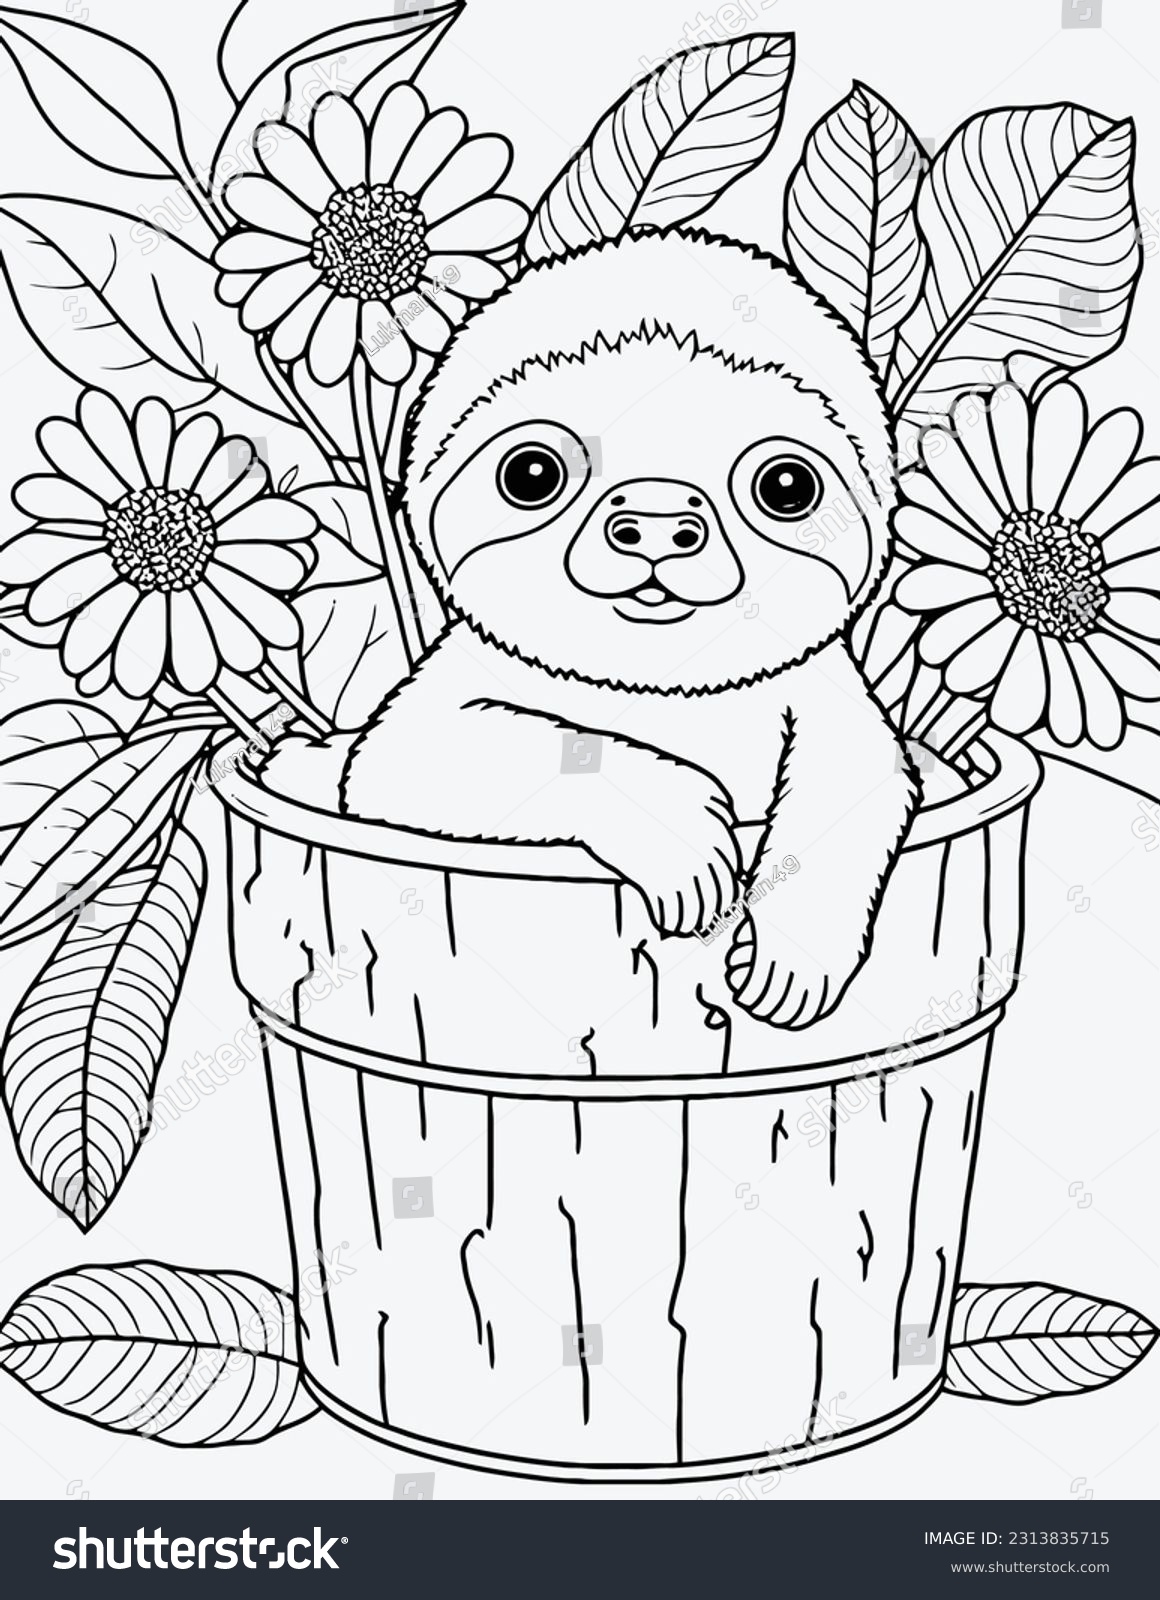 Cute cartoon animal coloring page nature stock